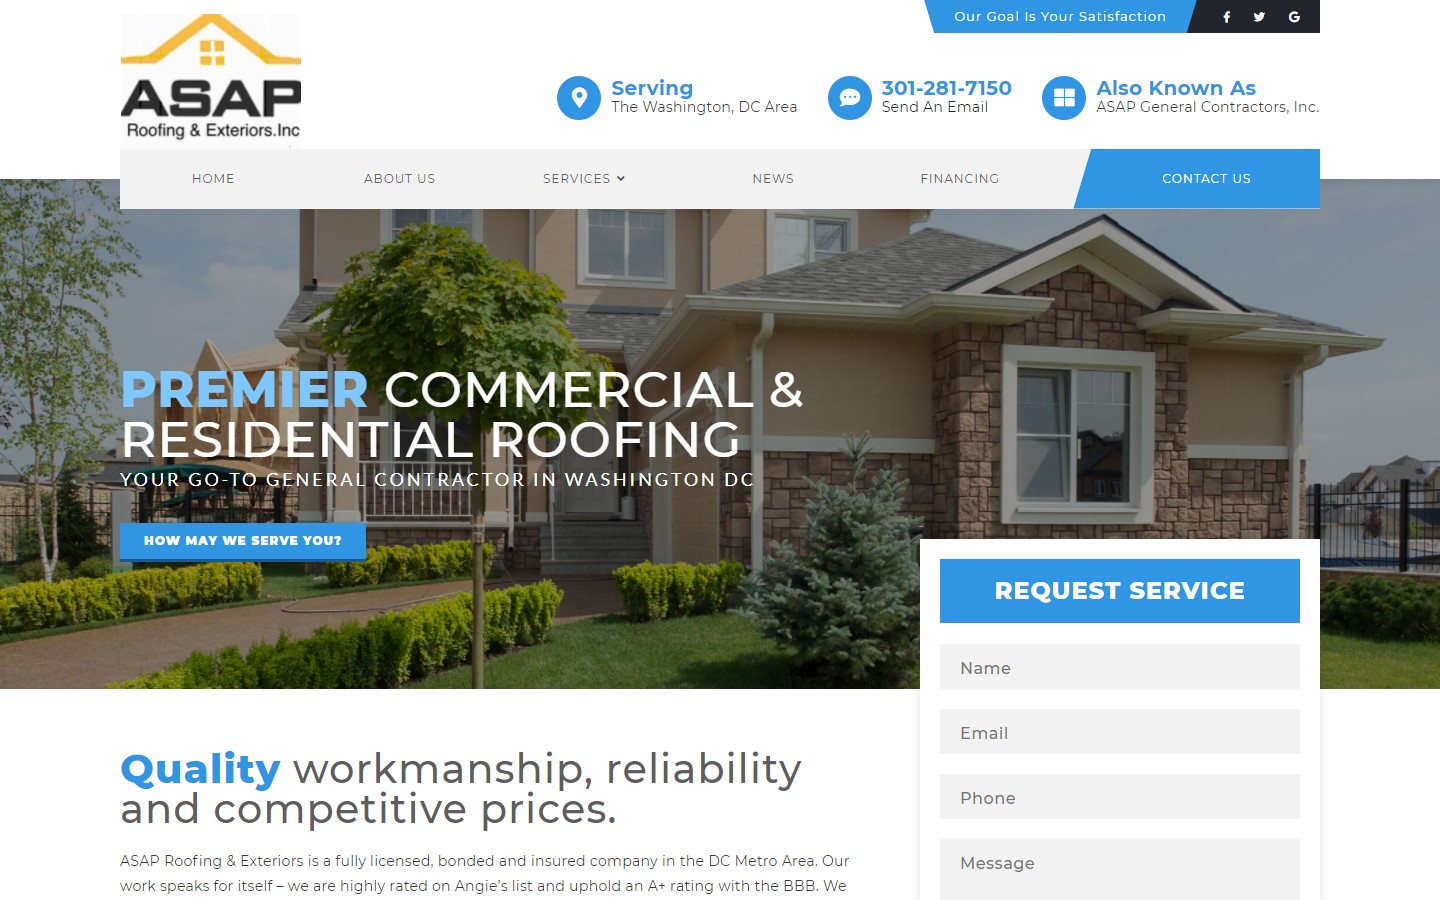 SAP Roofing and Exteriors